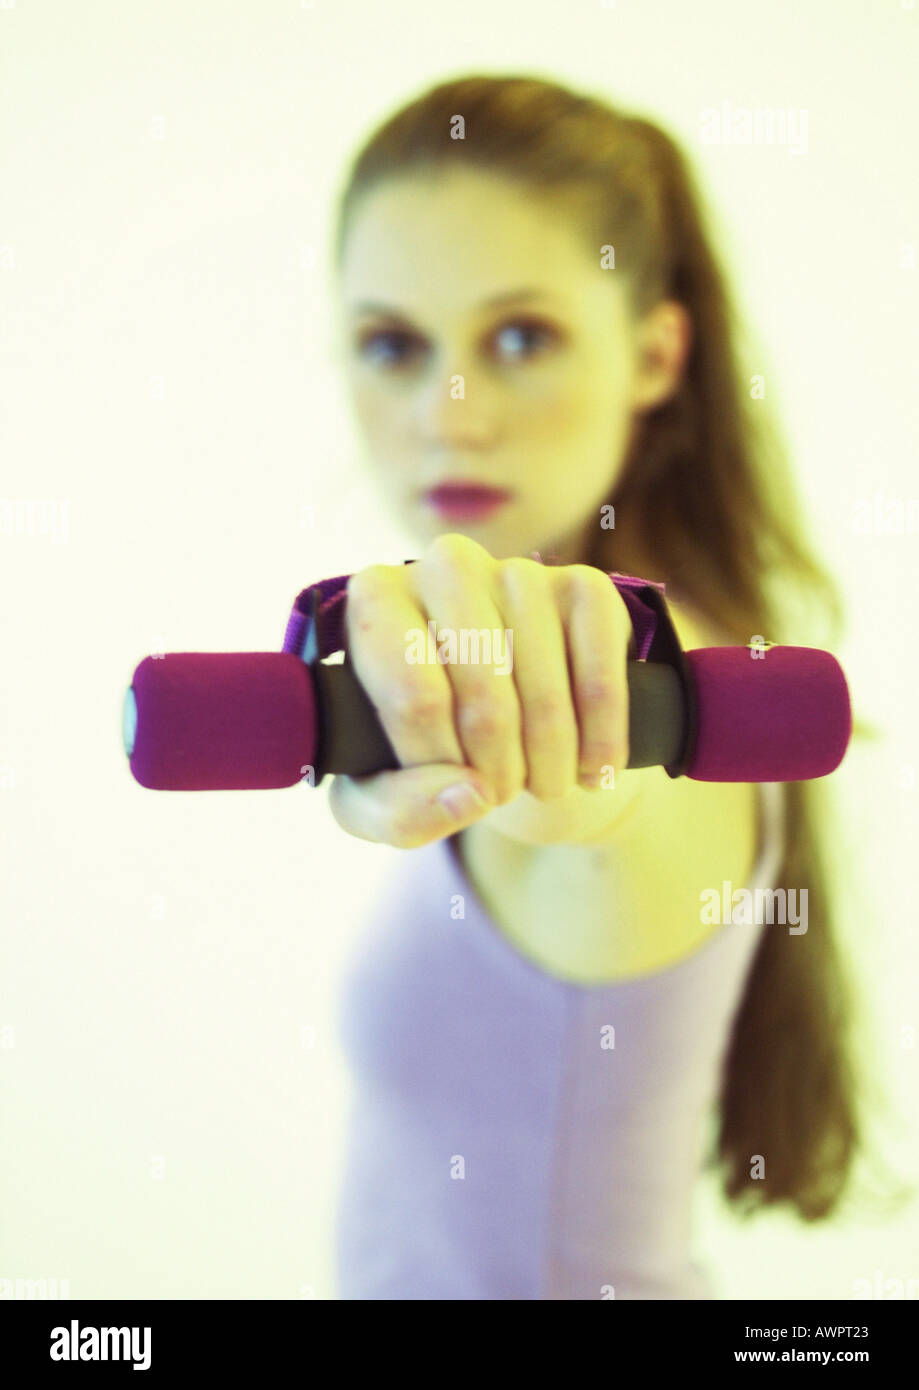 Woman lifting weights Stock Photo